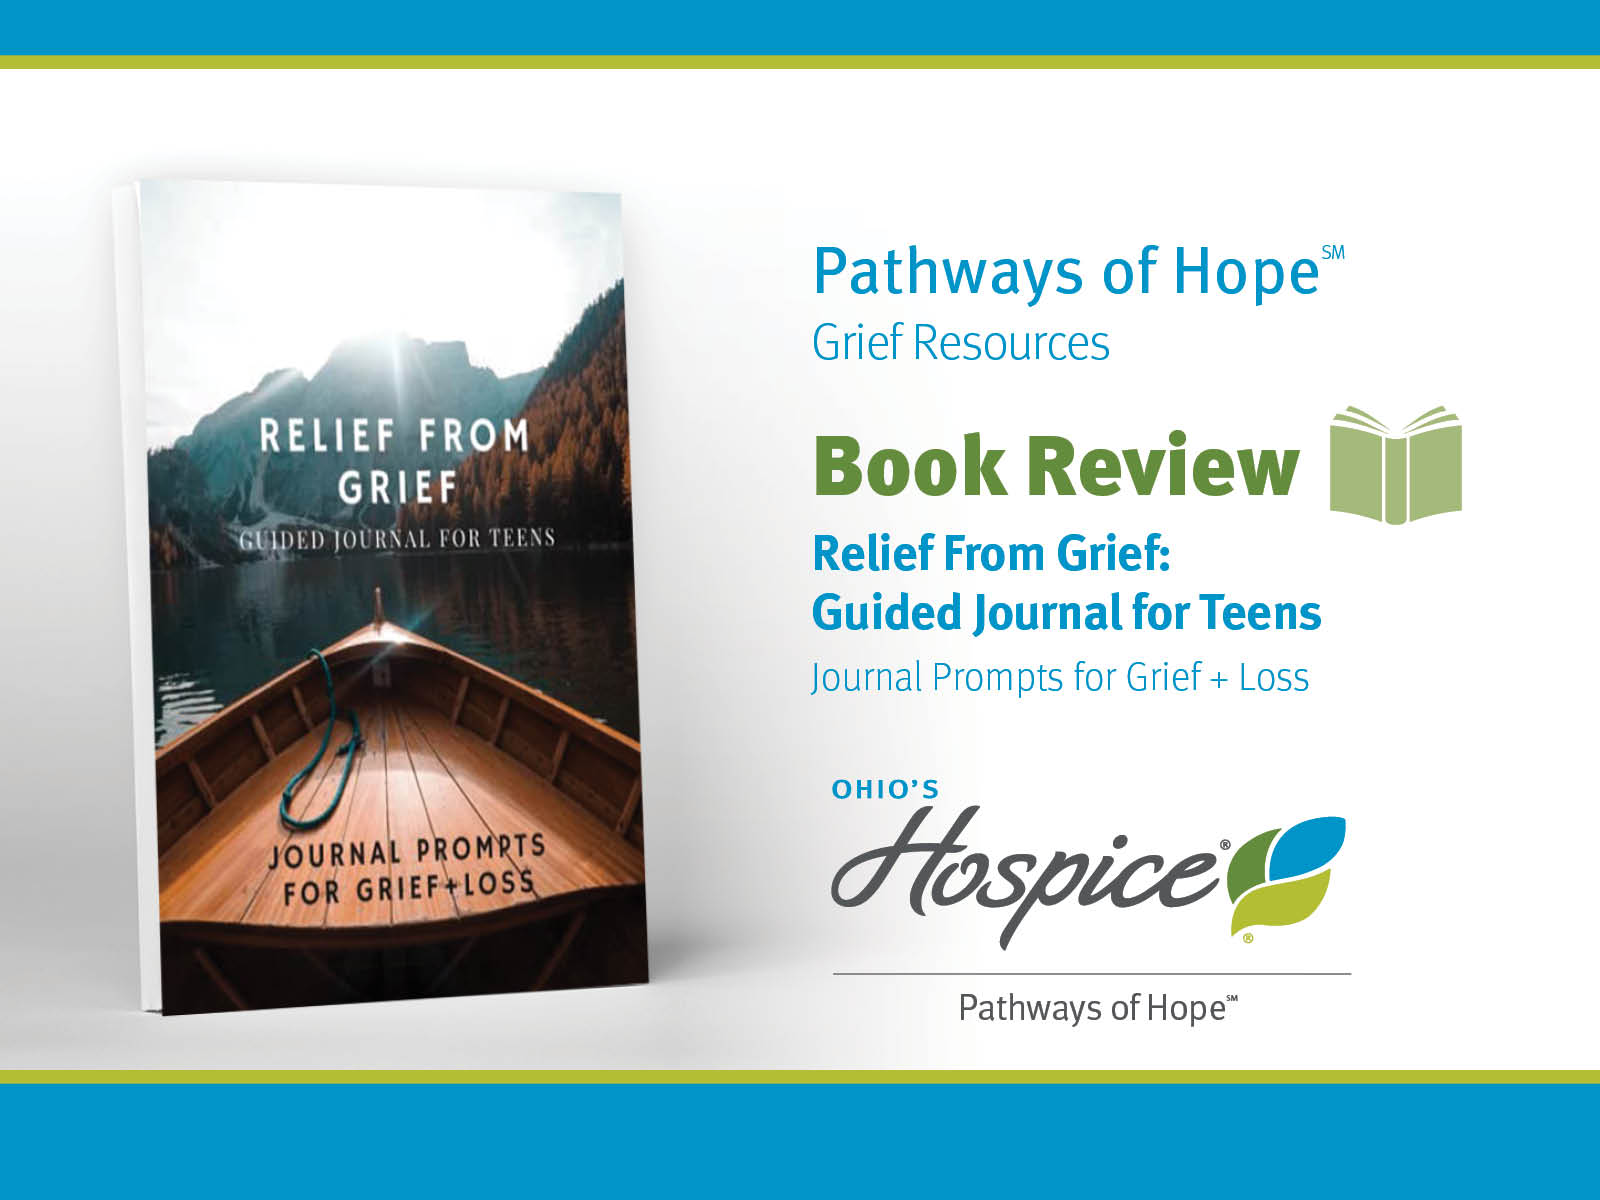 Pathways of Hope Book Review. Relief From Grief: Guided Journal for Teens